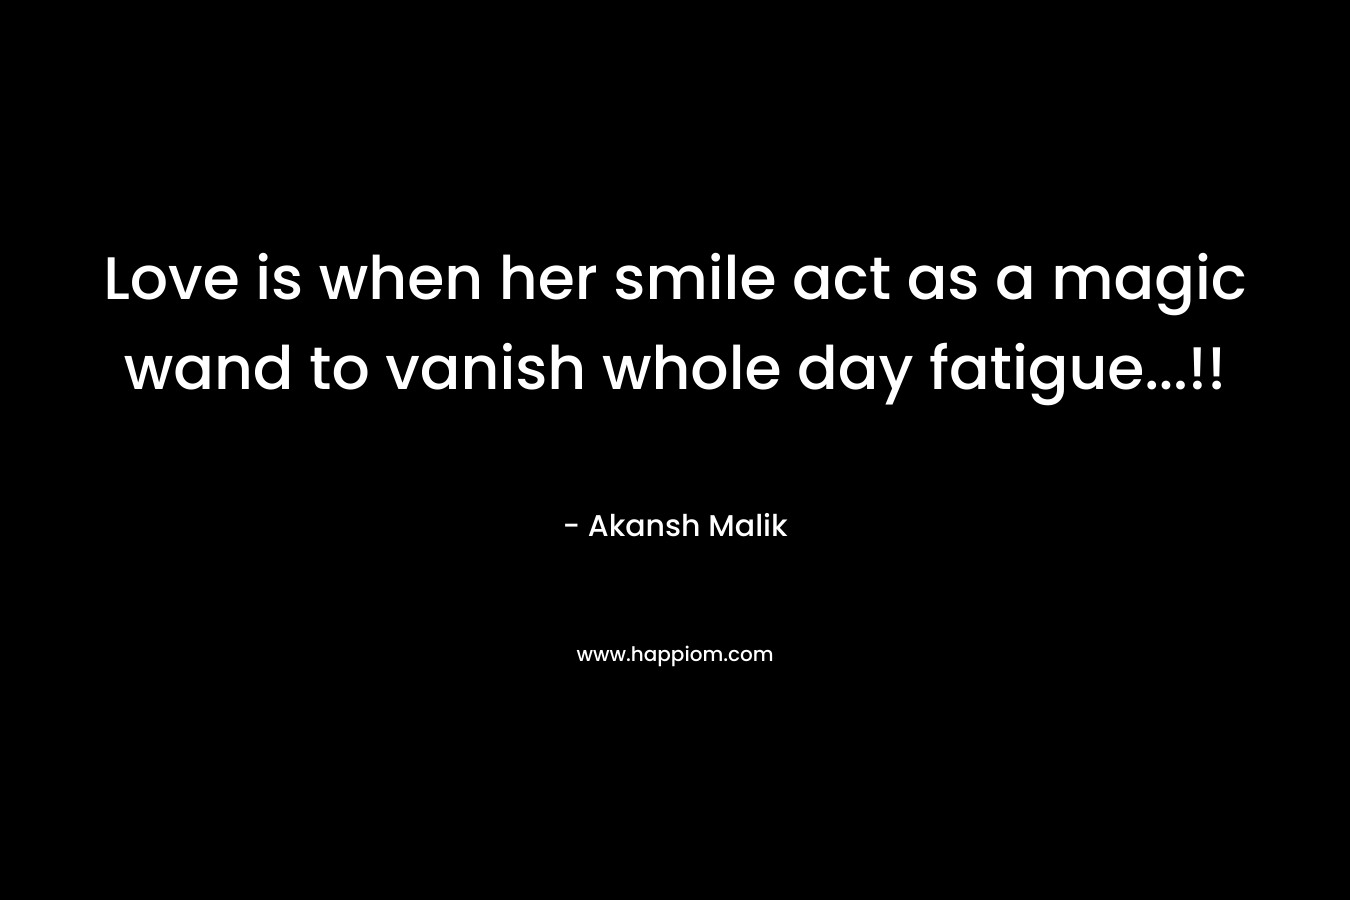 Love is when her smile act as a magic wand to vanish whole day fatigue…!! – Akansh Malik